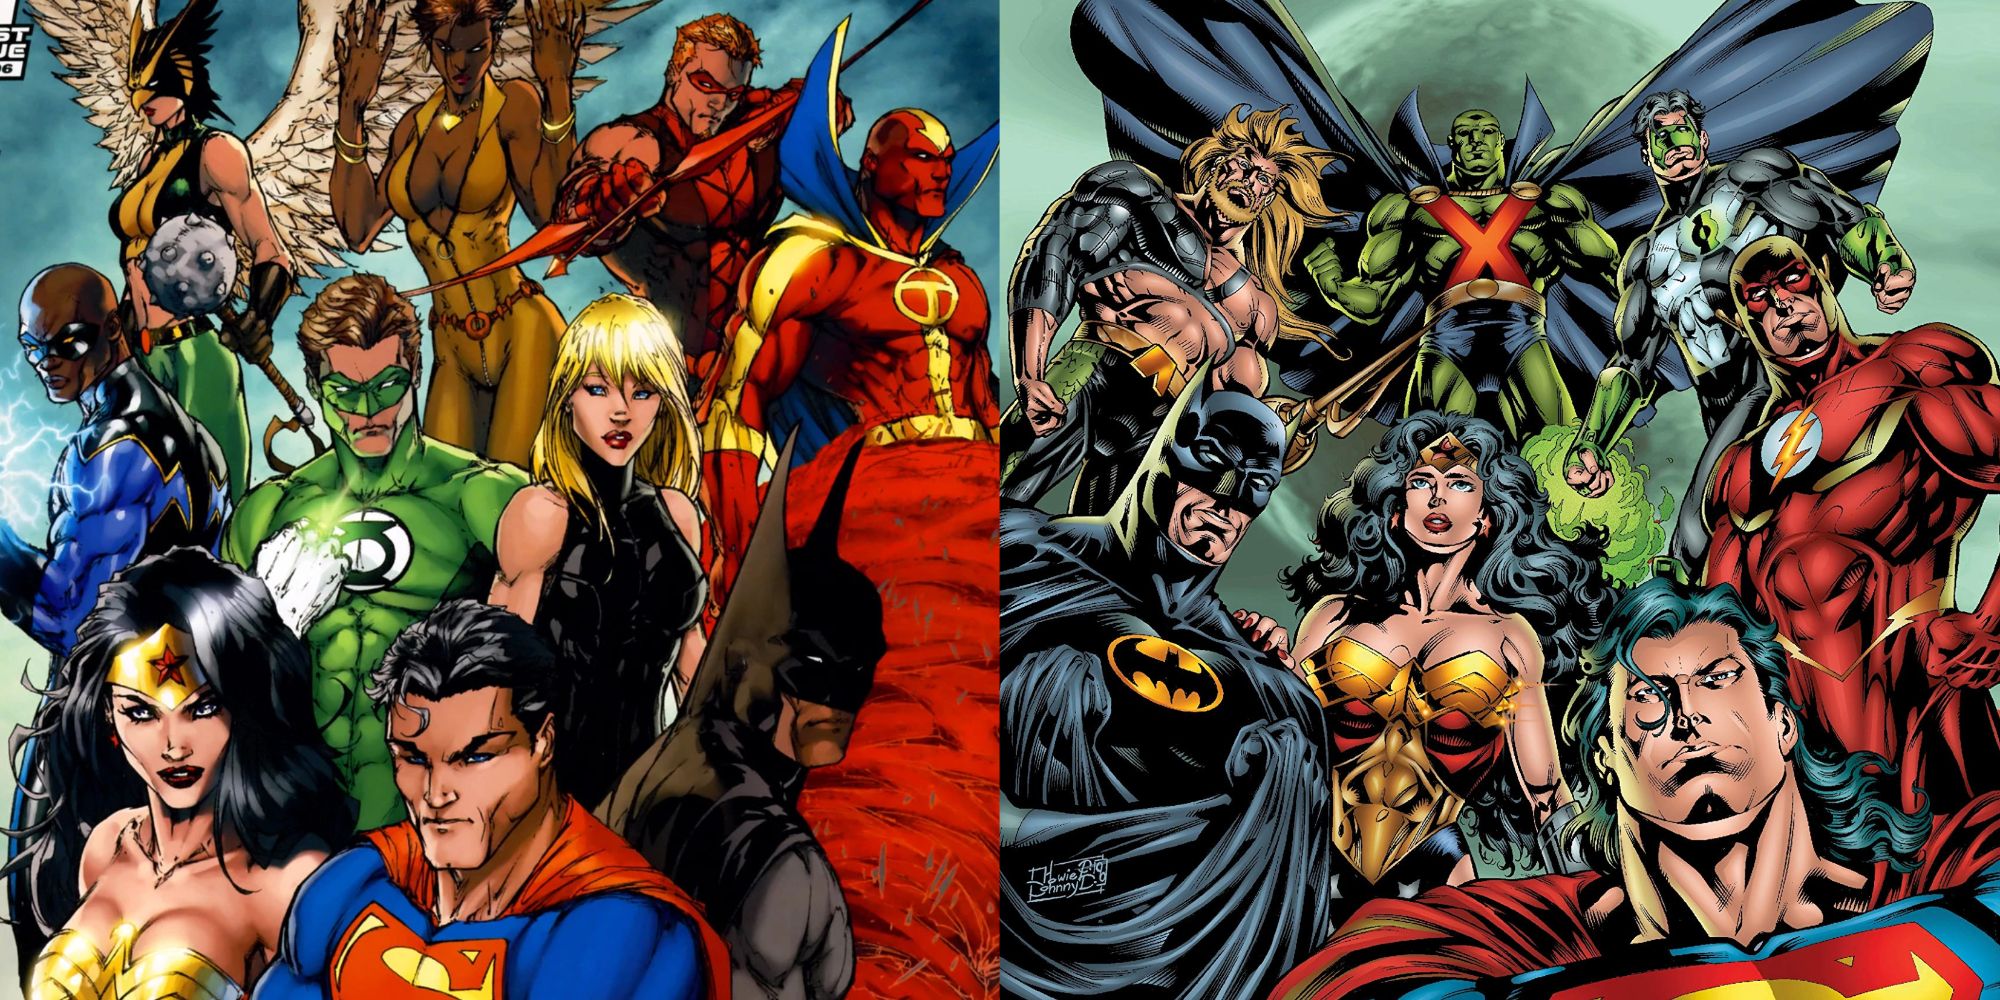 A split image of Justice League teams in The Tornado's Path and New World Order